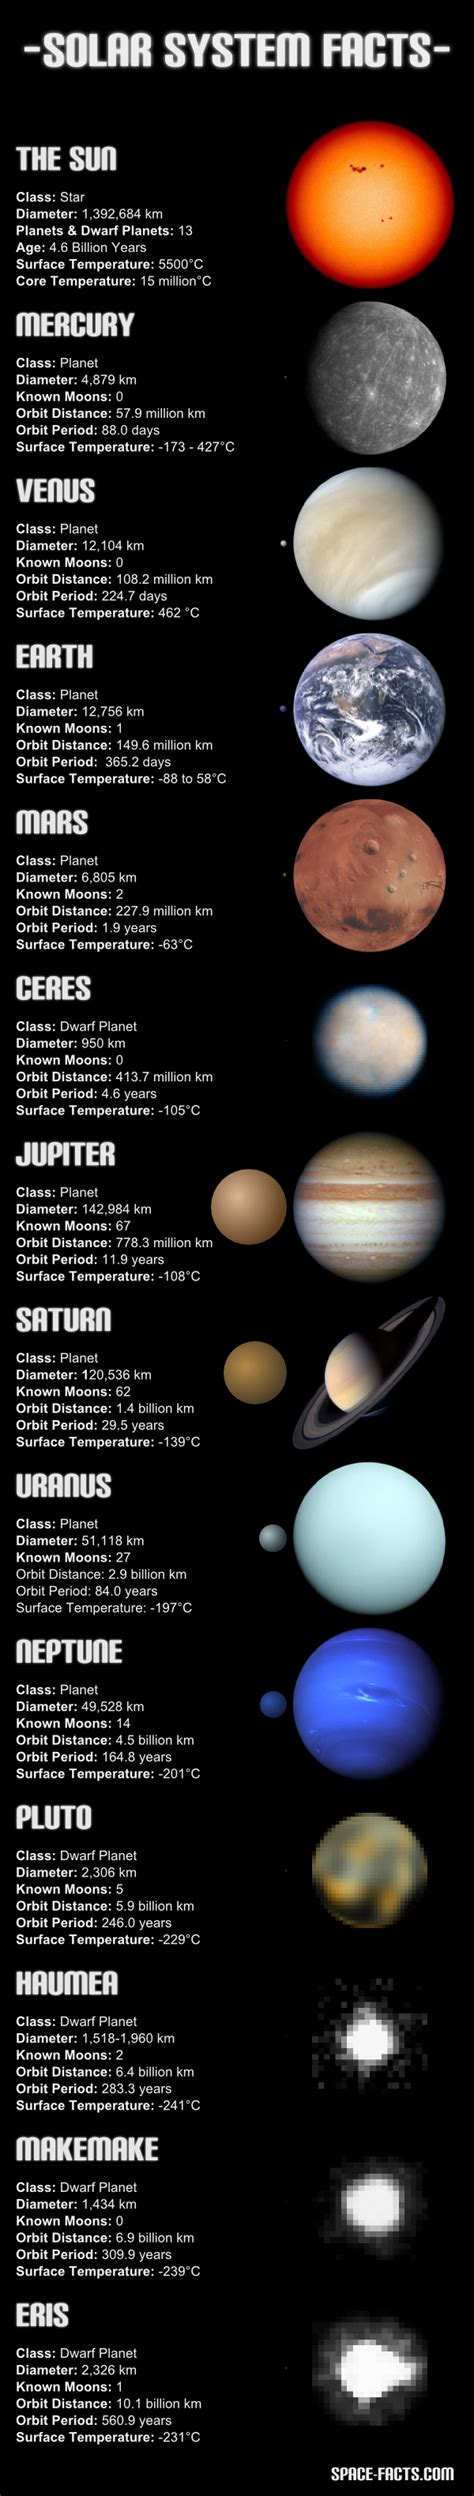 By definition, a planet must orbit the sun. Solar System Planets & Dwarf Planets Information Chart